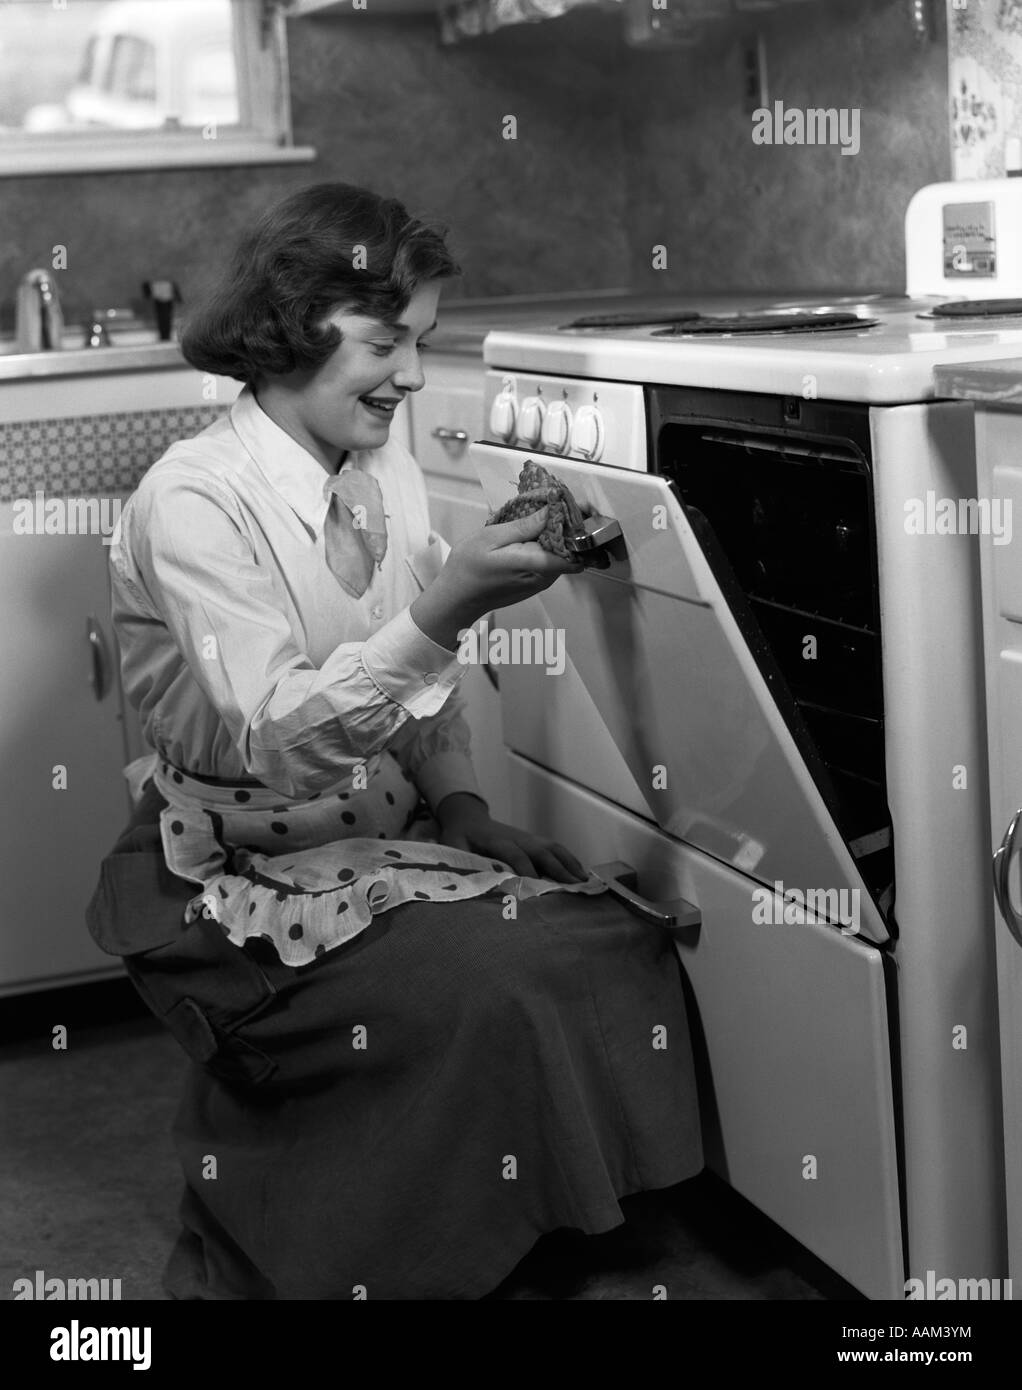 1950s YOUNG WOMAN GIRL WEARING APRON KNEELING OPENING OVEN DOOR KITCHEN STOVE COOKING Stock Photo